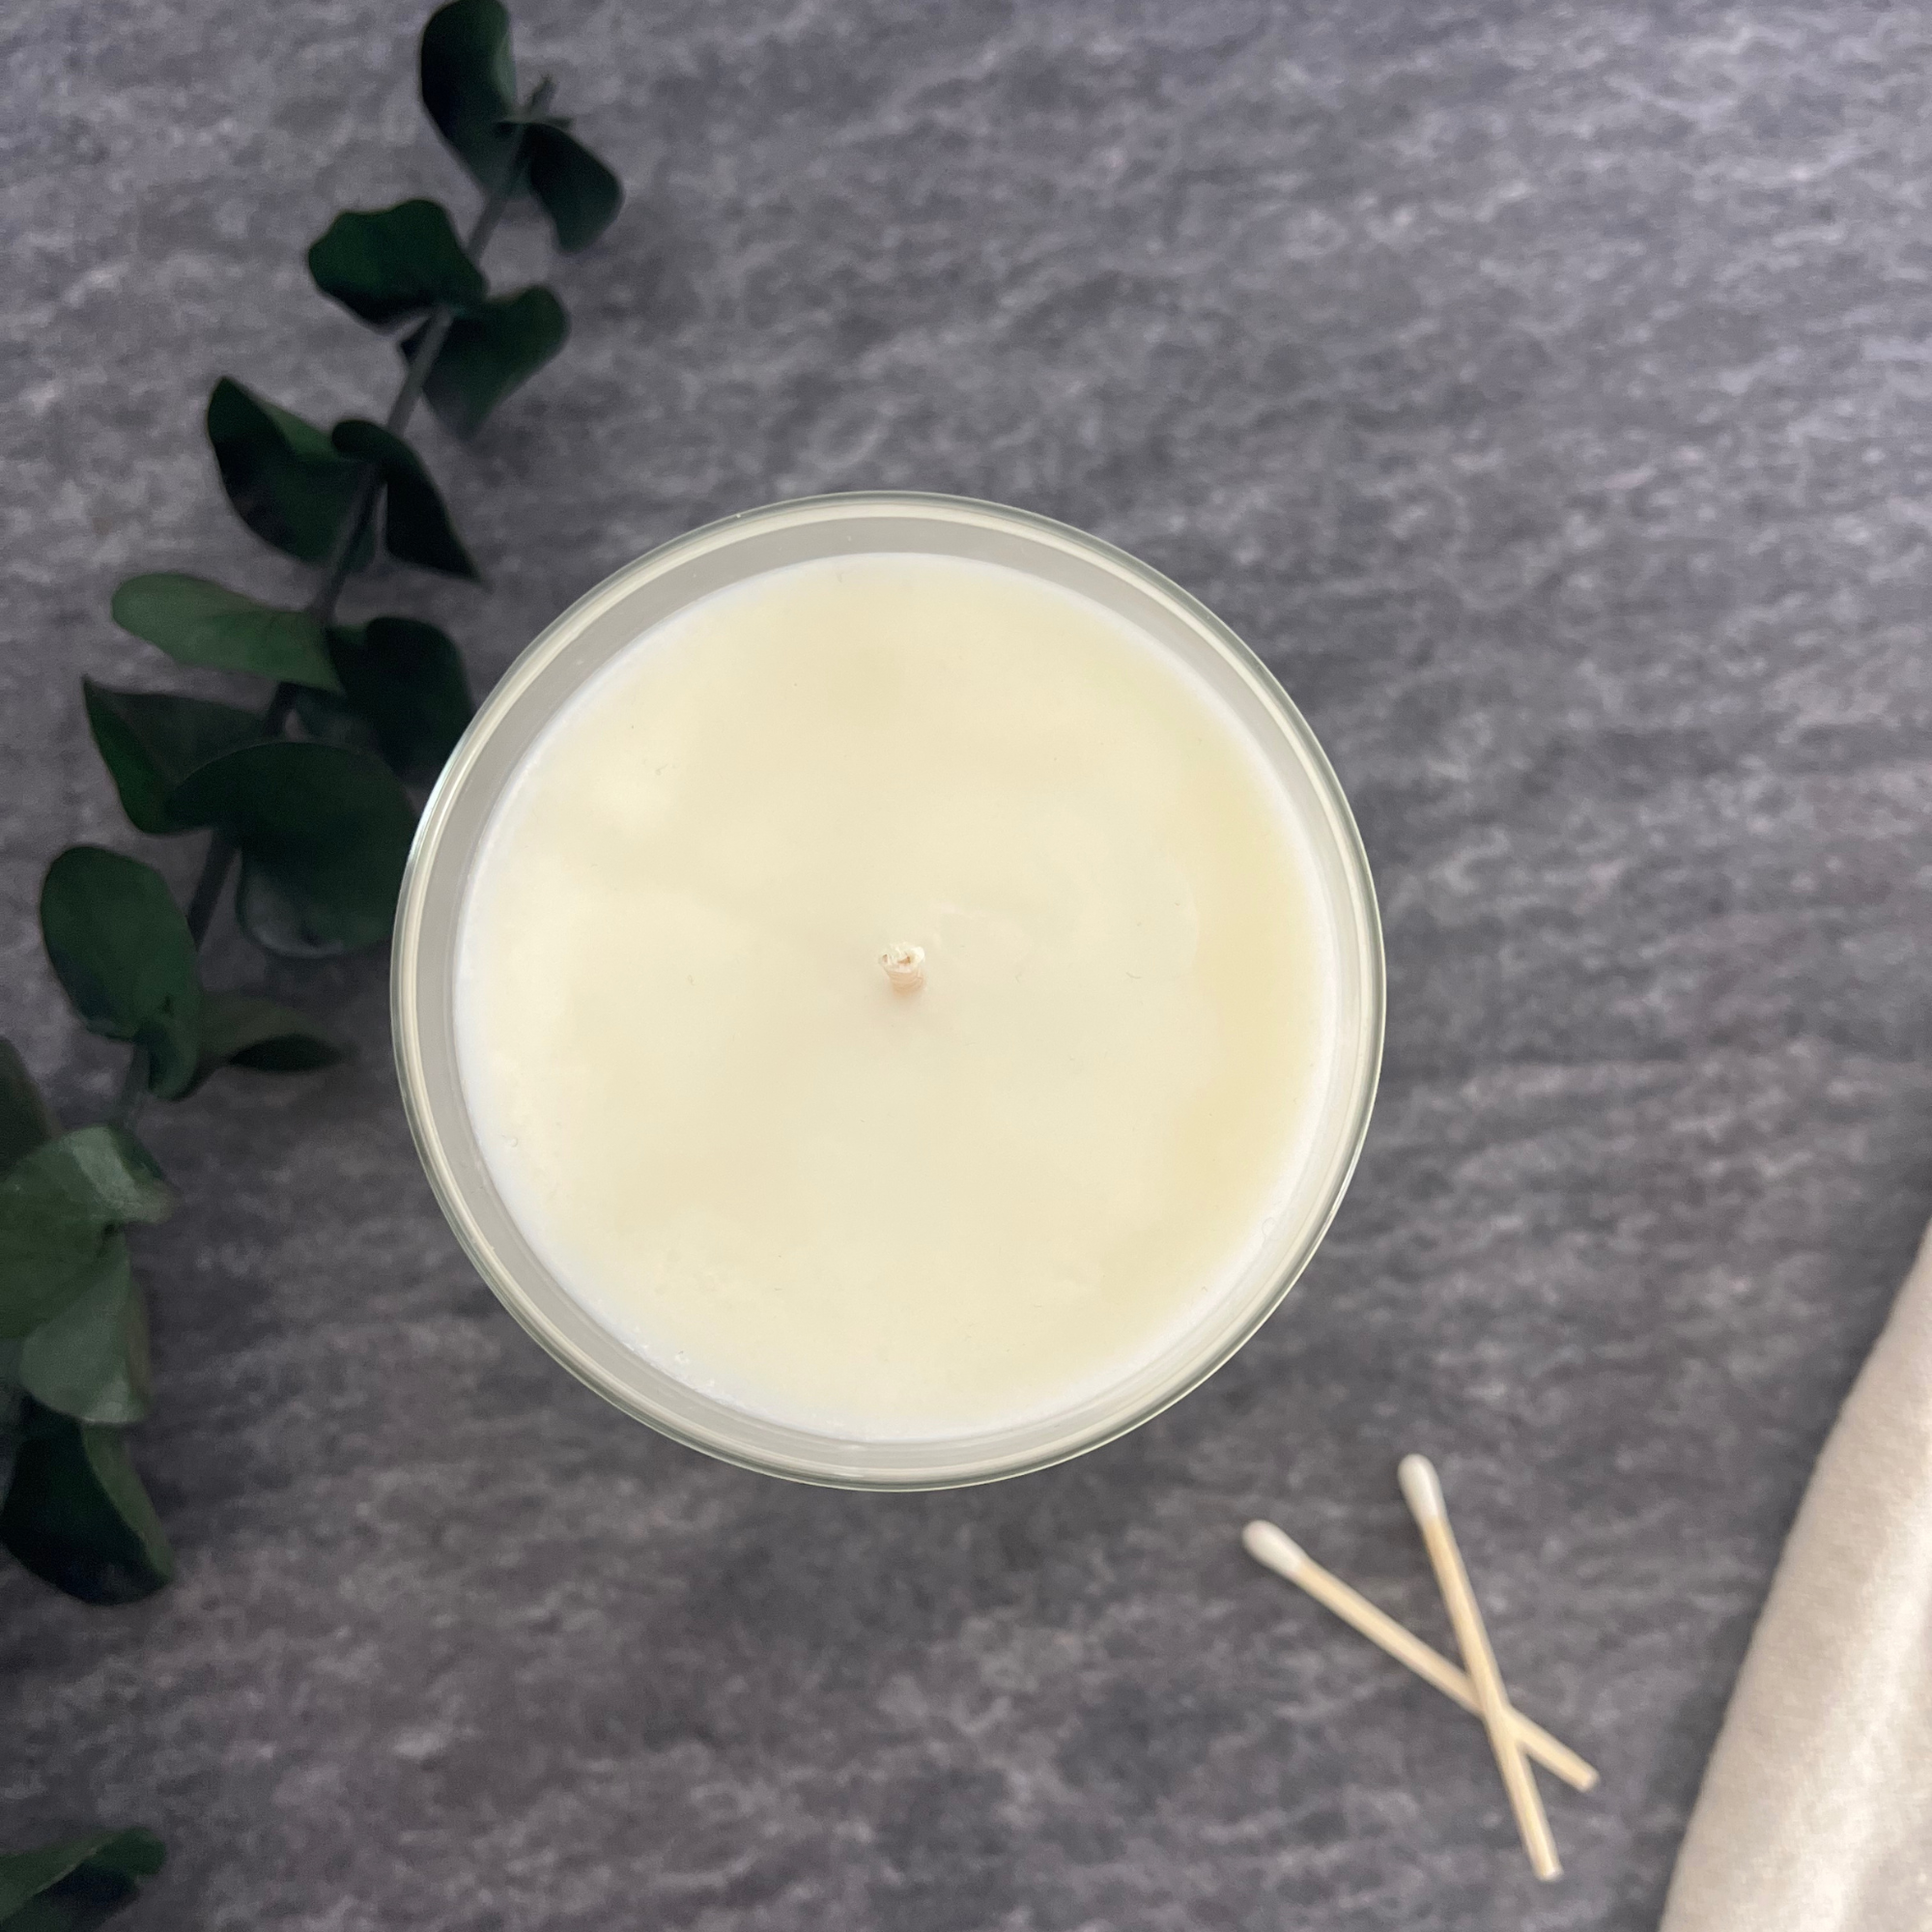 The smooth top of a soy wax candle with a sprig of eucalyptus and two wooden matches